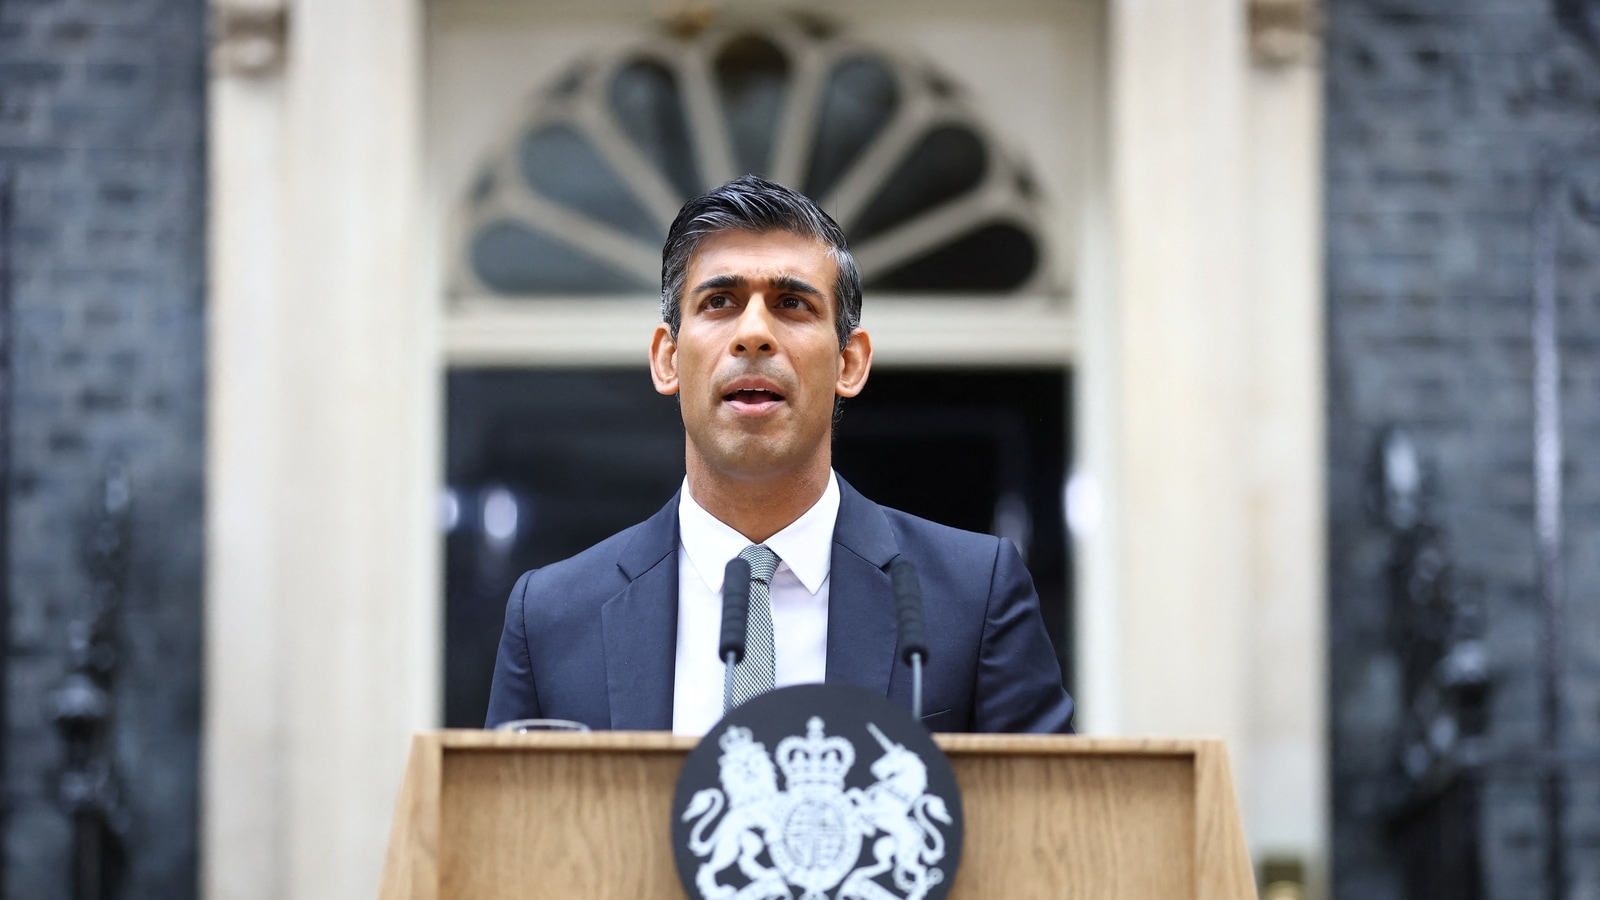 mistakes-were-made-will-fix-them-top-quotes-from-rishi-sunak-s-first-address-as-uk-pm